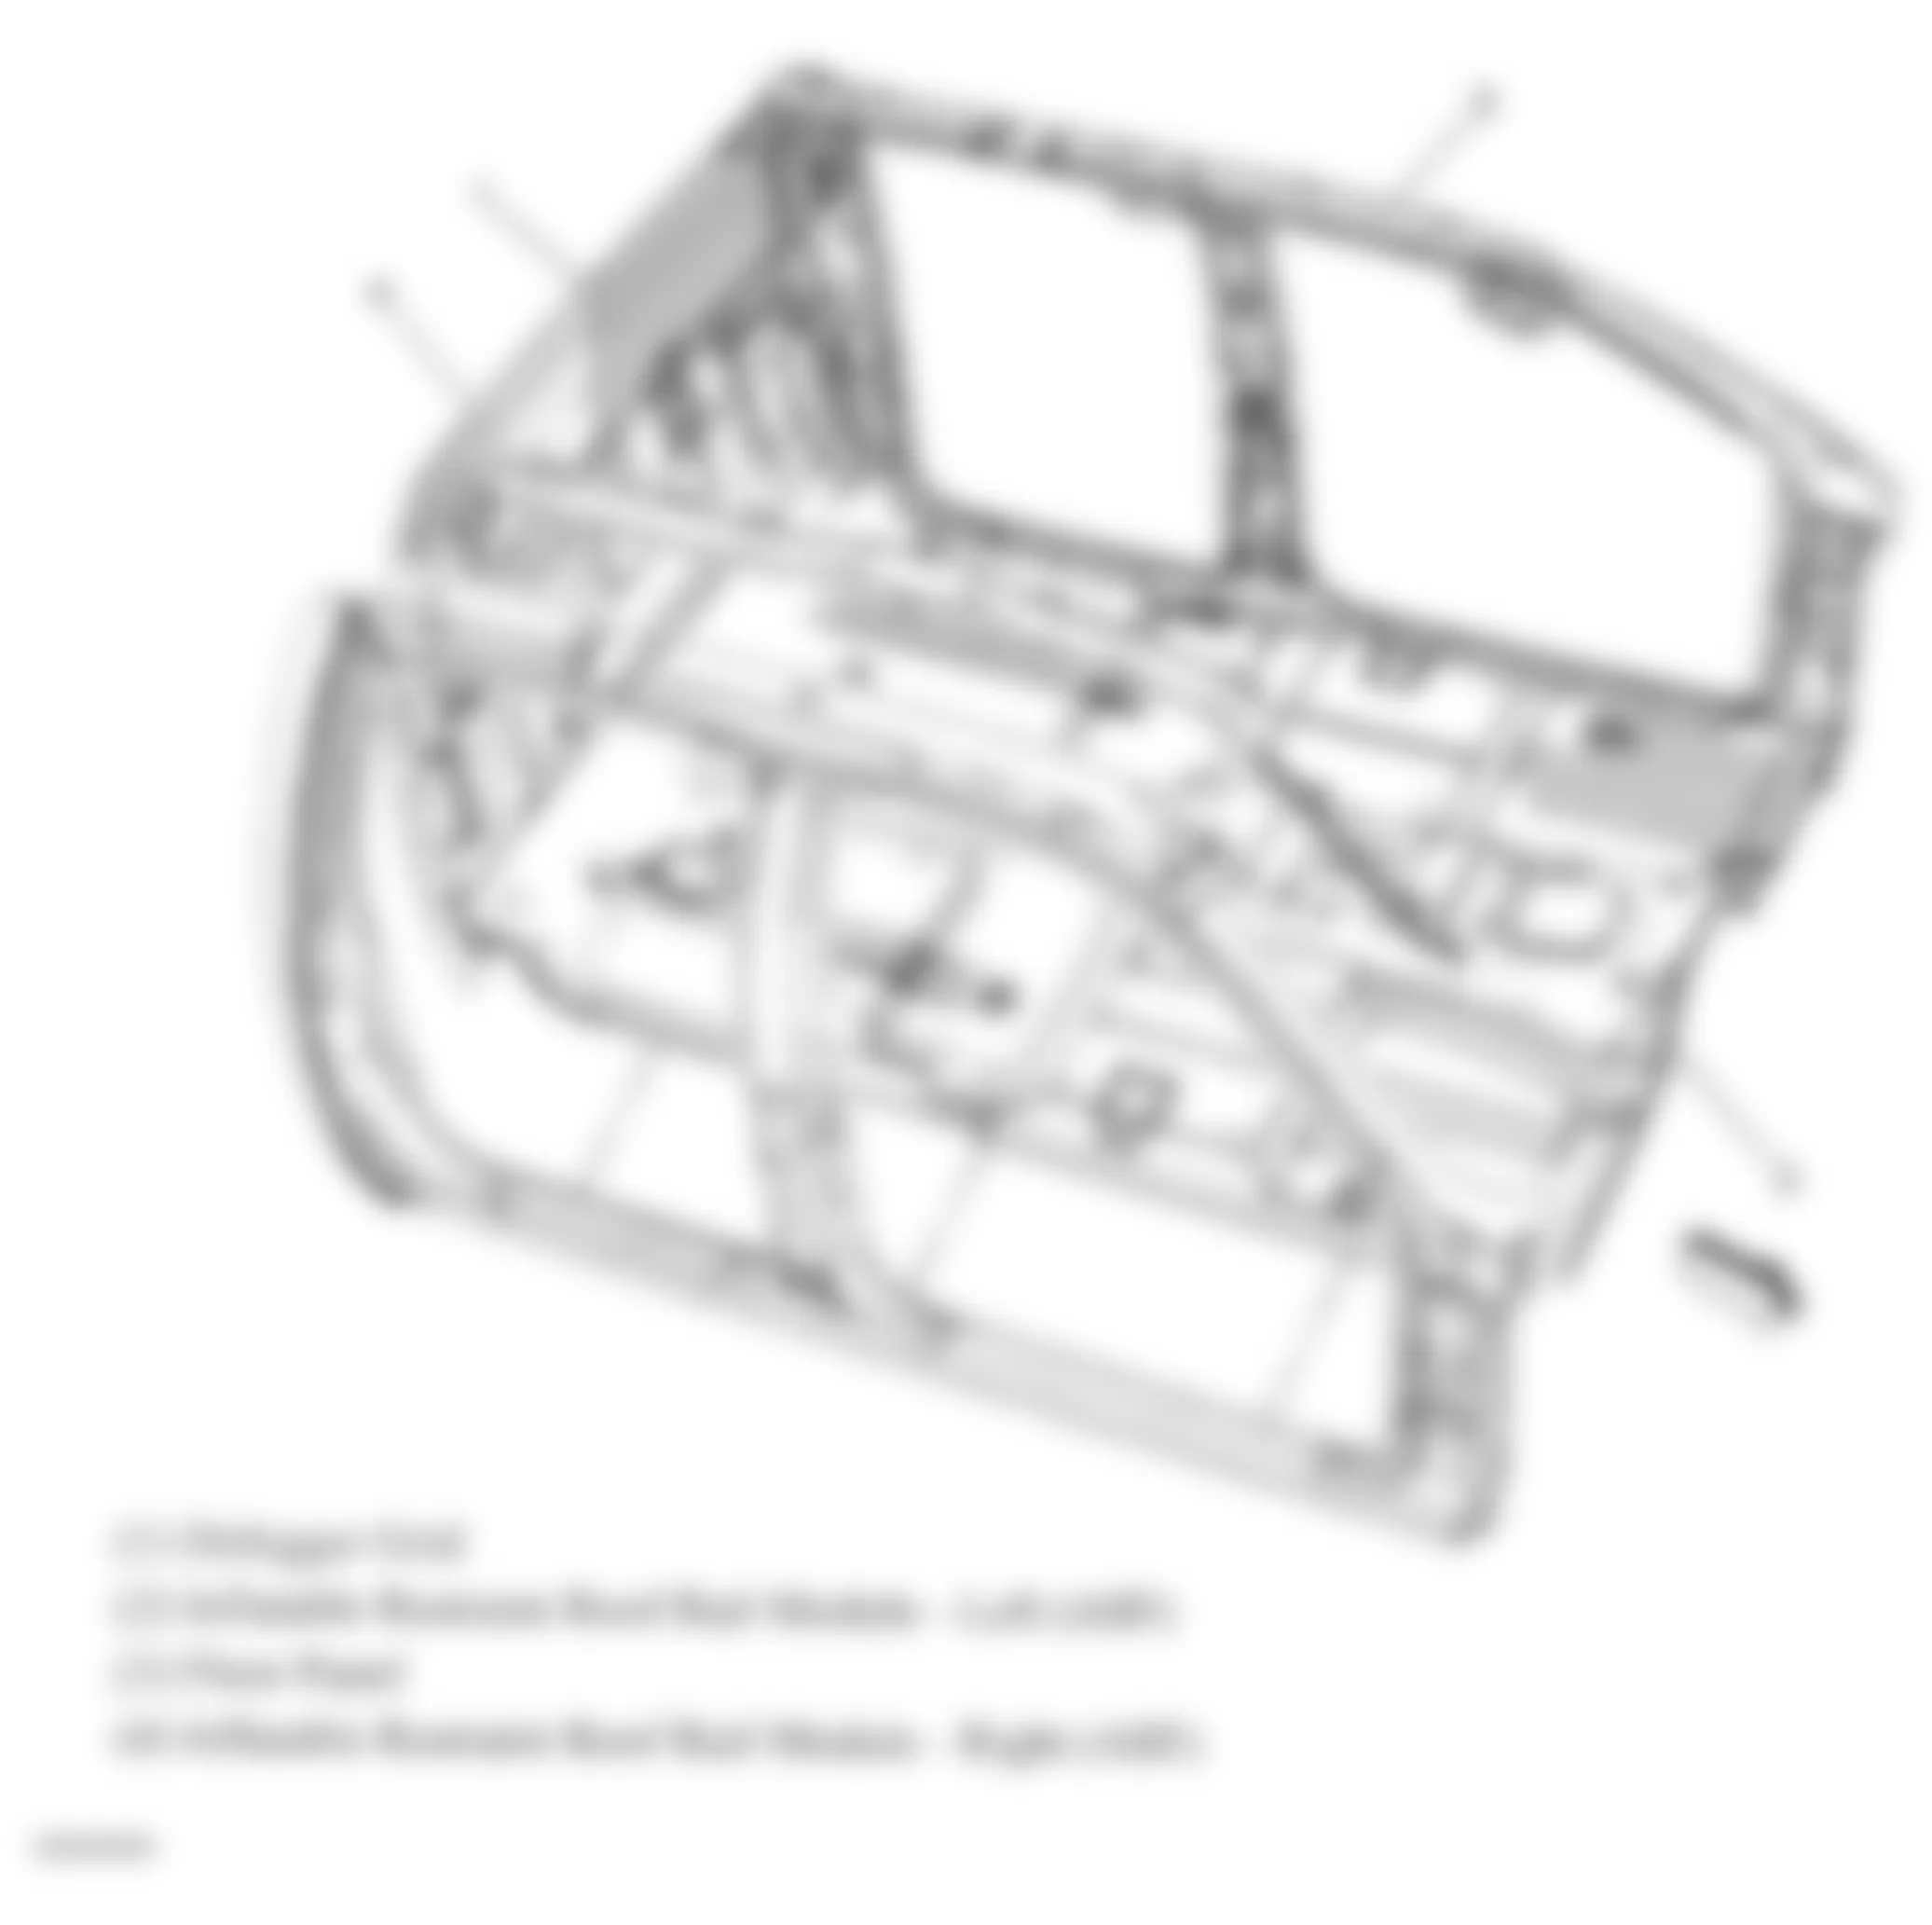 GMC Sierra 3500 HD 2008 - Component Locations -  Roof Rail Air Bags (Extended Cab & Crew Cab)